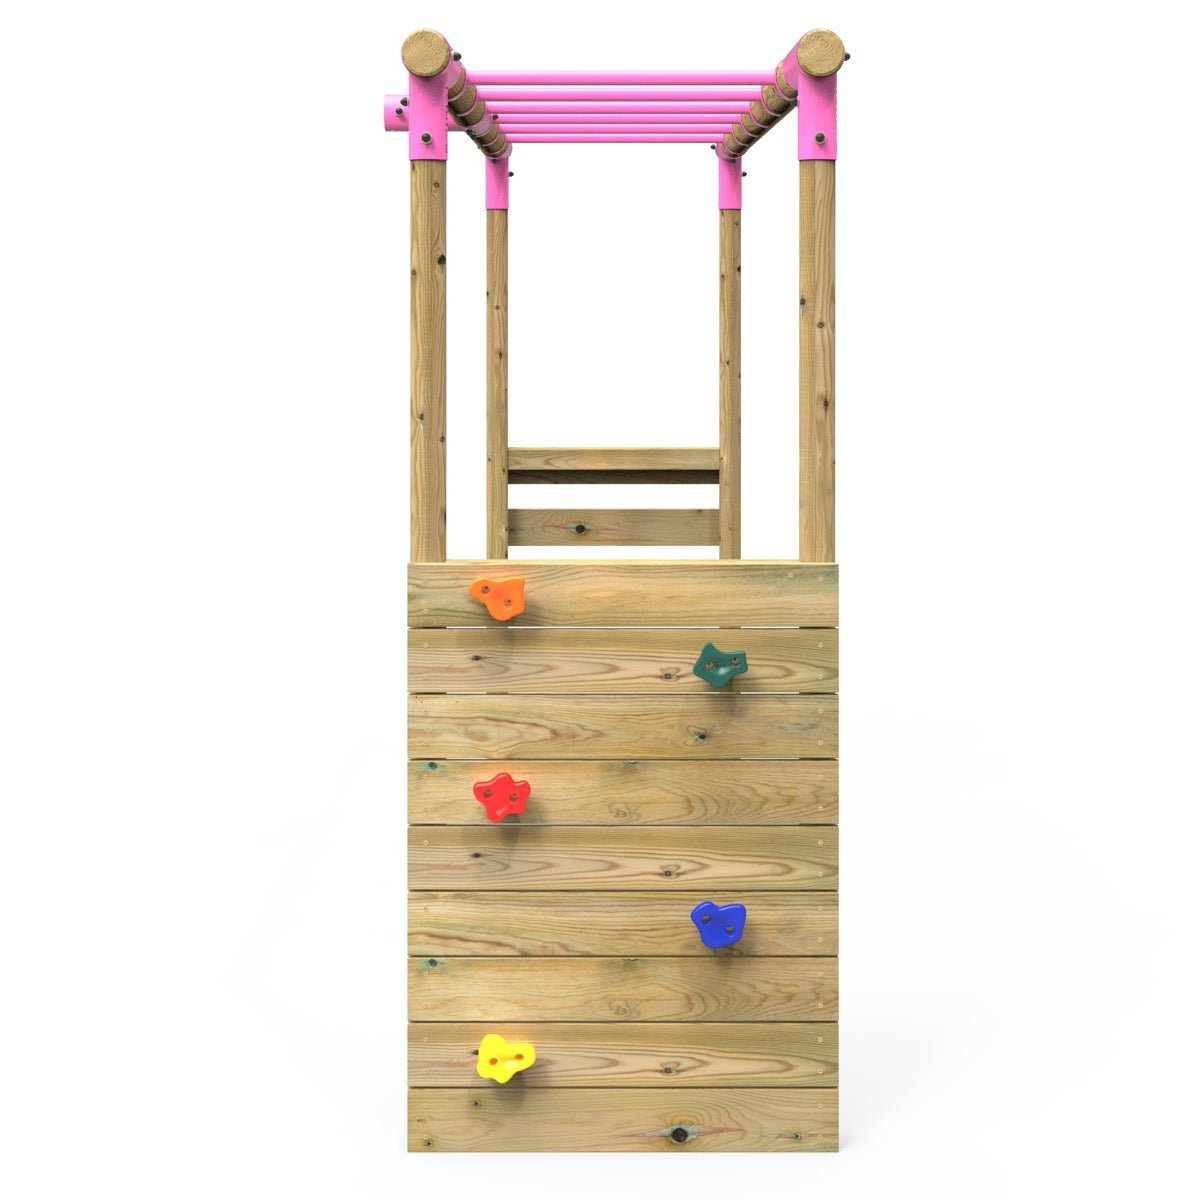 Rebo Extra-Long Monkey Bar Extension Kit for Round Wood Swing Frames - Pink